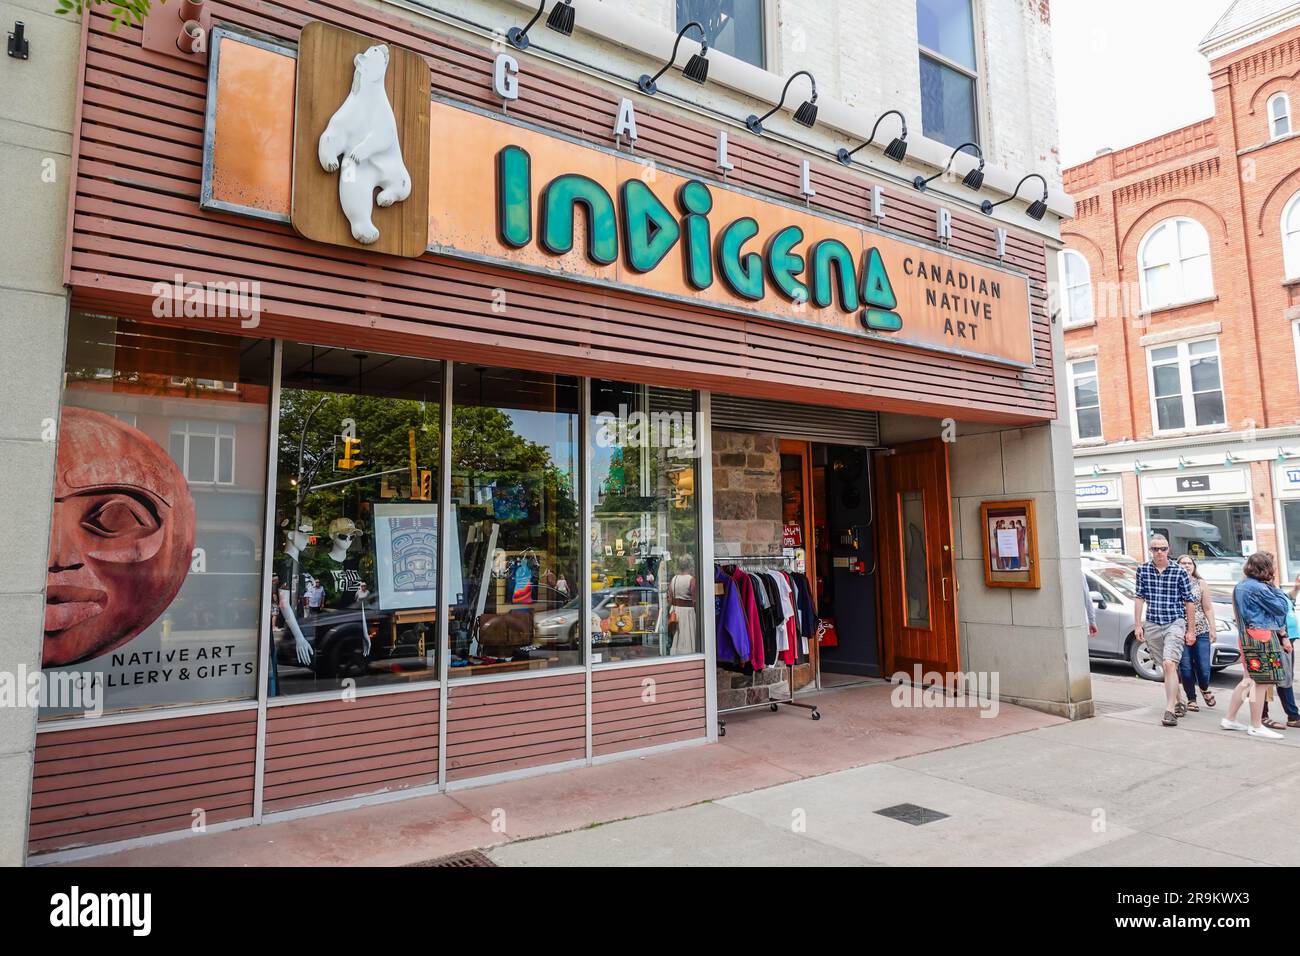 Gallery indigena is a local shop selling native art work in Stratford, Ontario, Canada Stock Photo